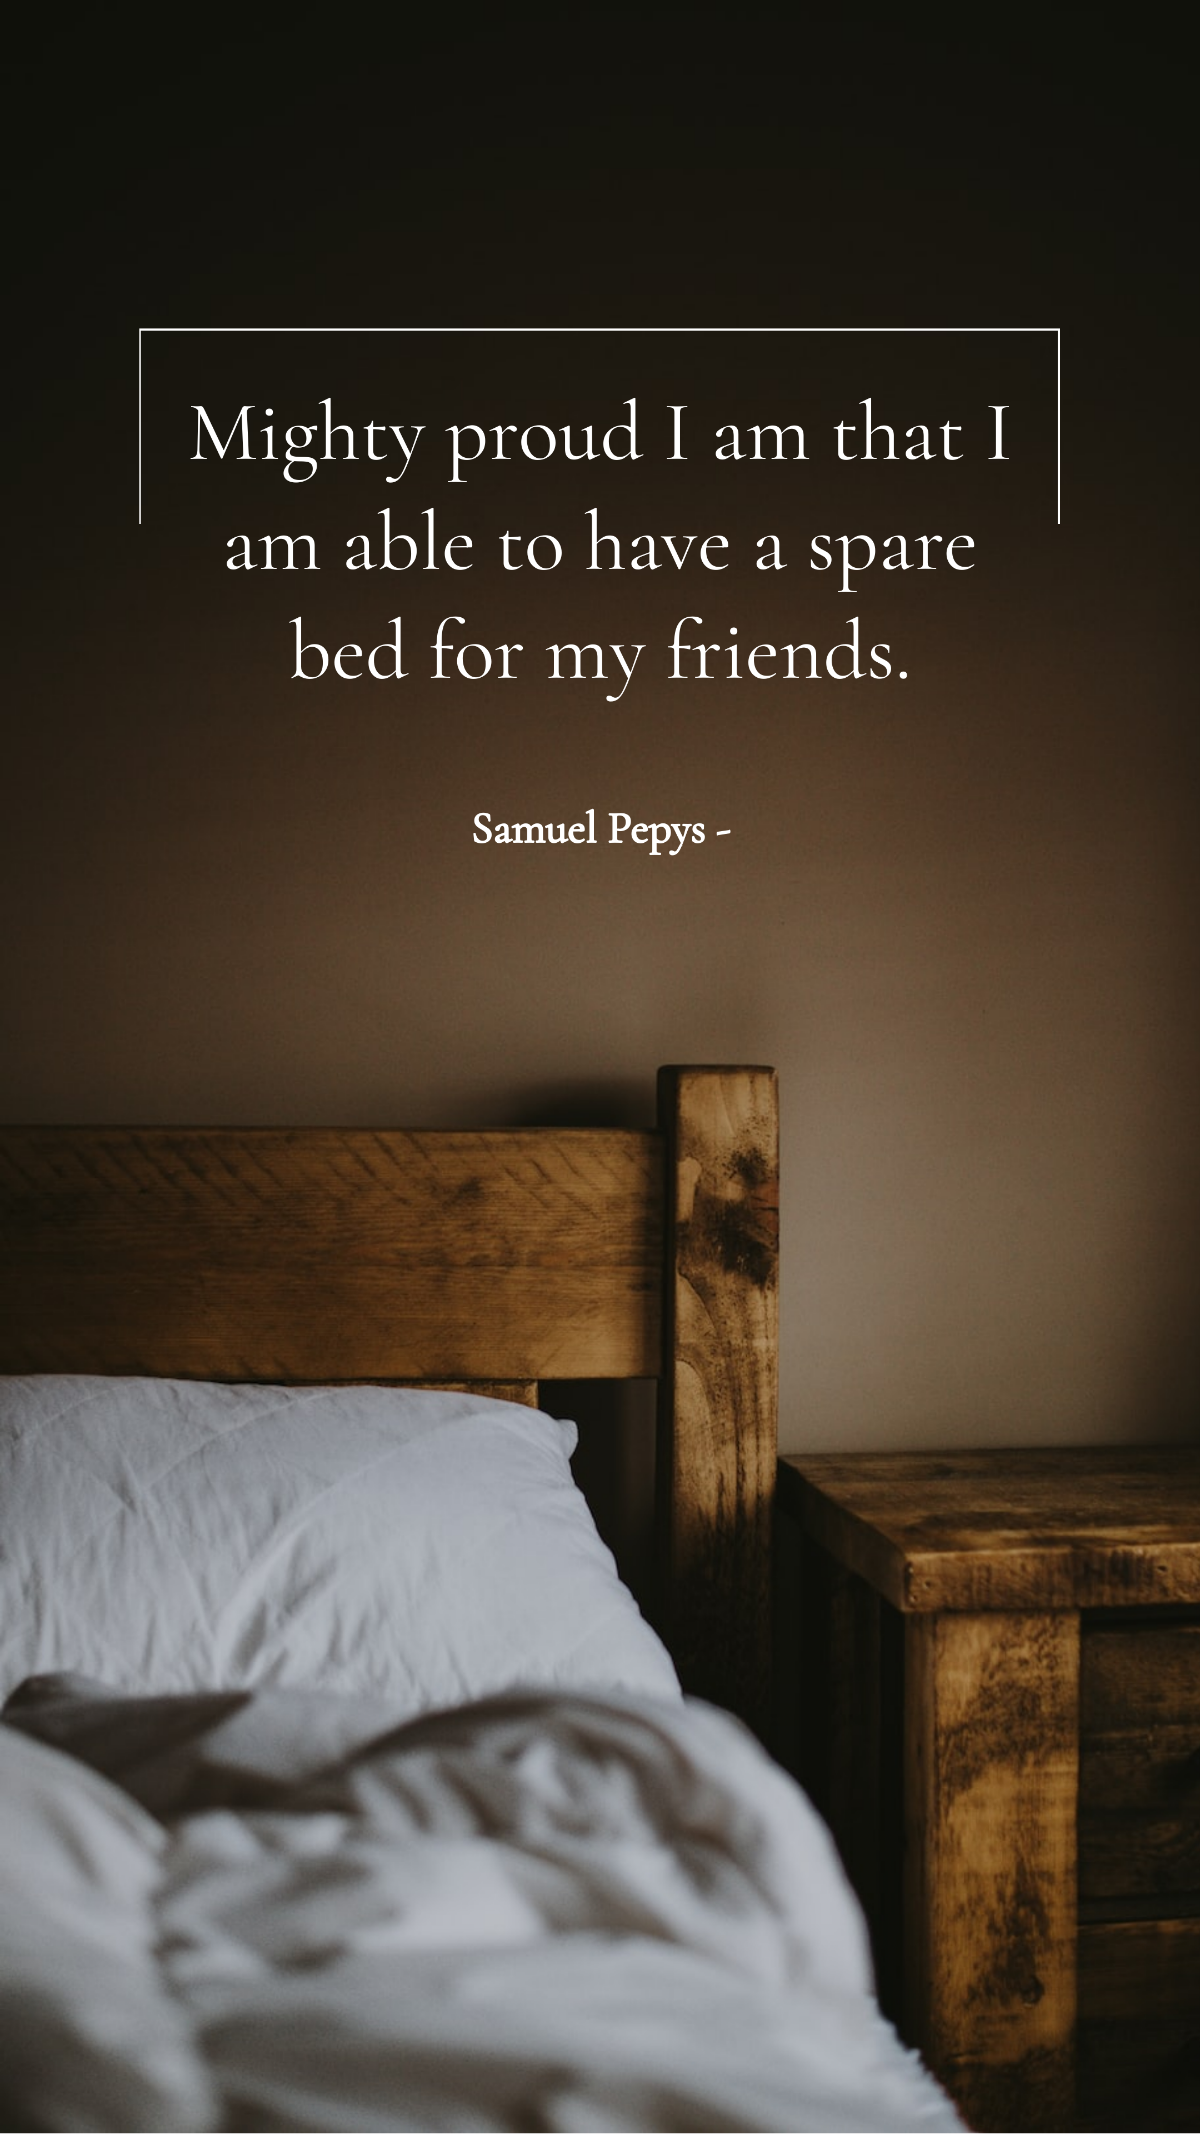 Samuel Pepys - Mighty proud I am that I am able to have a spare bed for my friends. Template